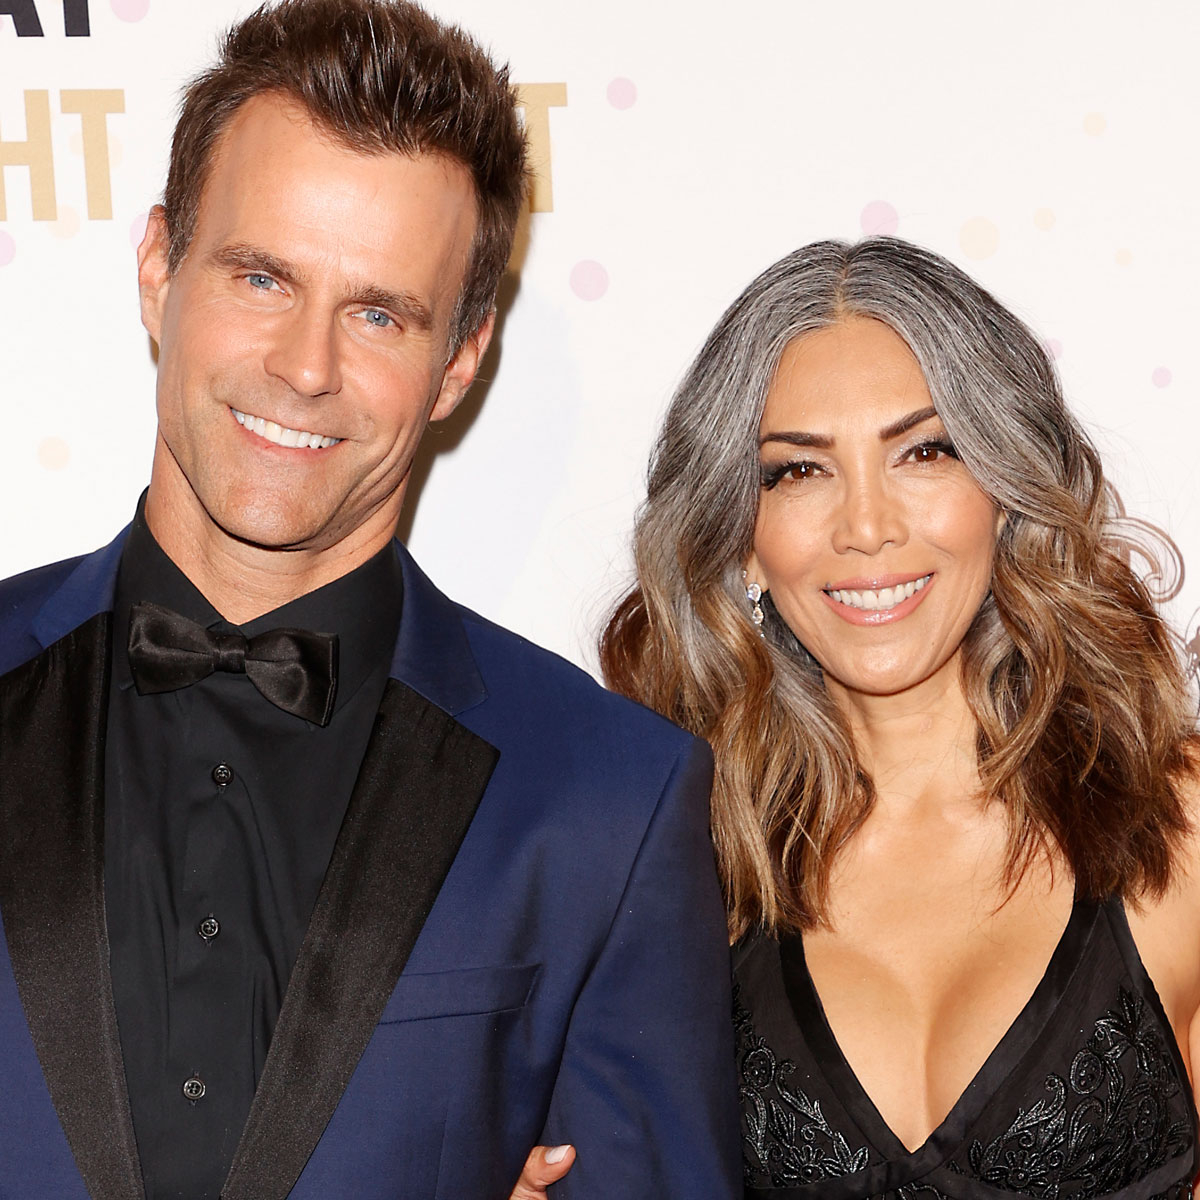 Soap Star Cameron Mathison & Wife Vanessa Break Up After 22 Years